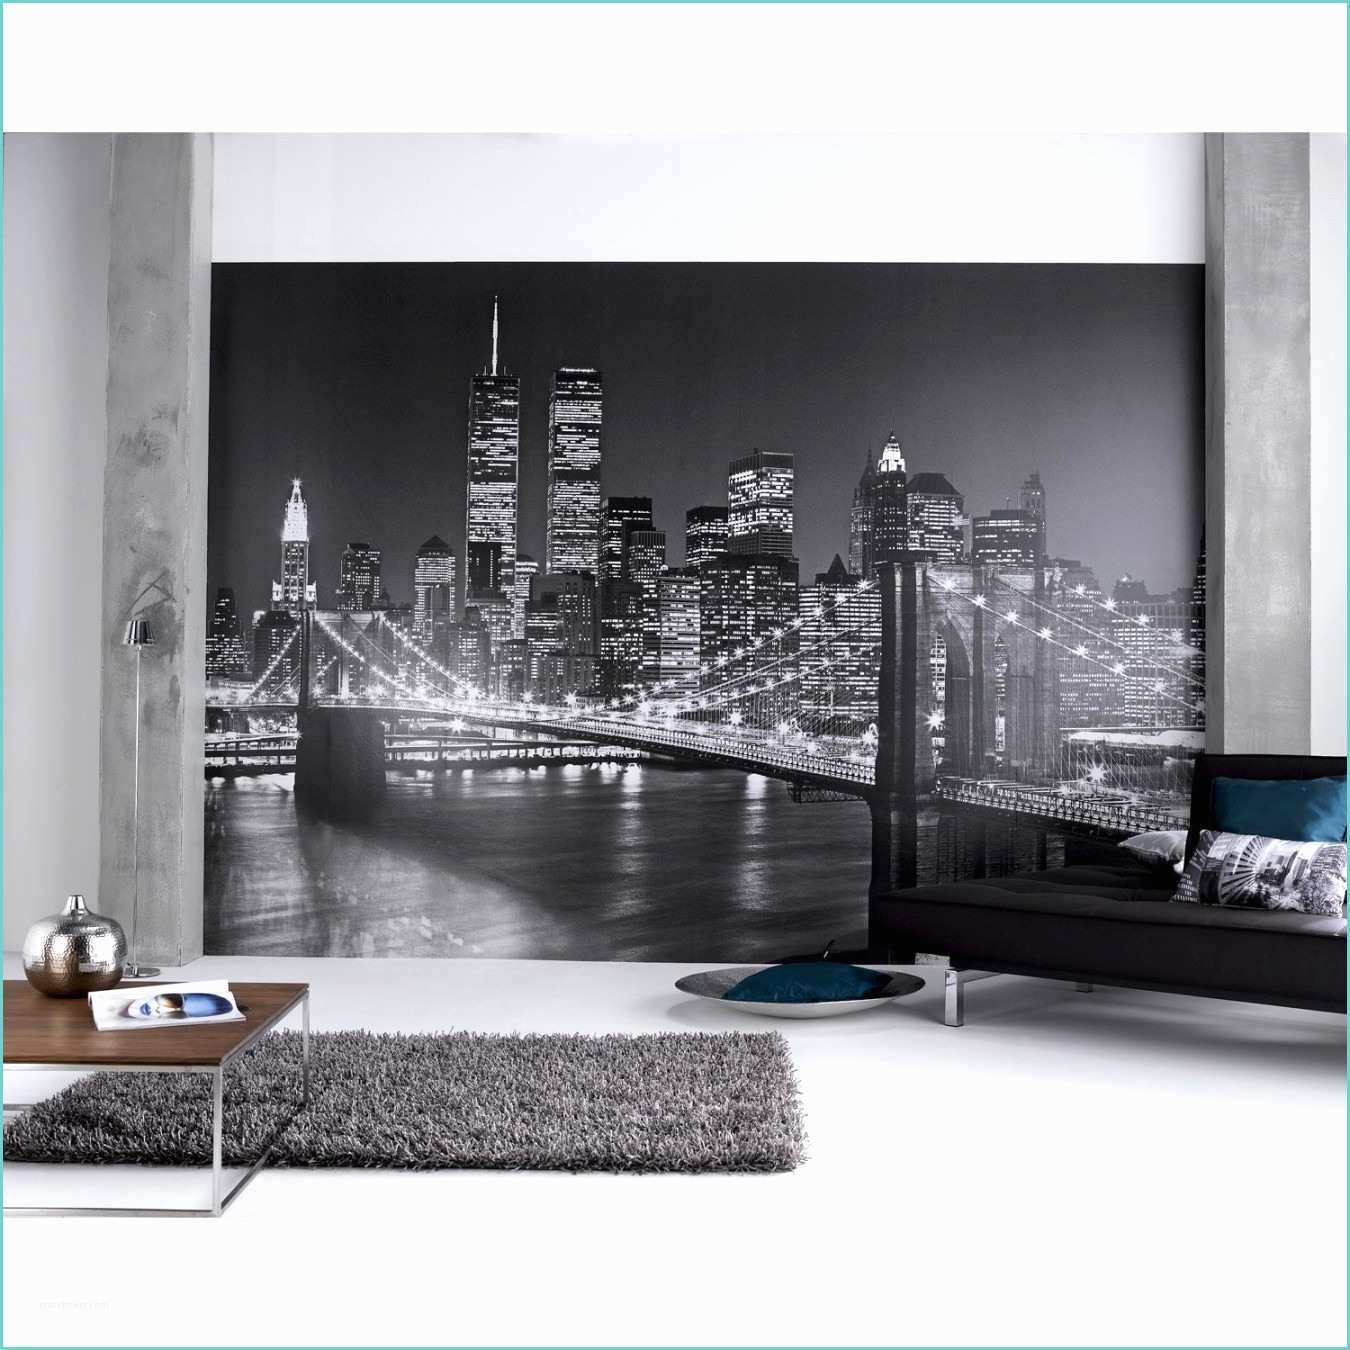 Poster Montagne Pas Cher 34 Grand Poster Mural Pas Cher Idees